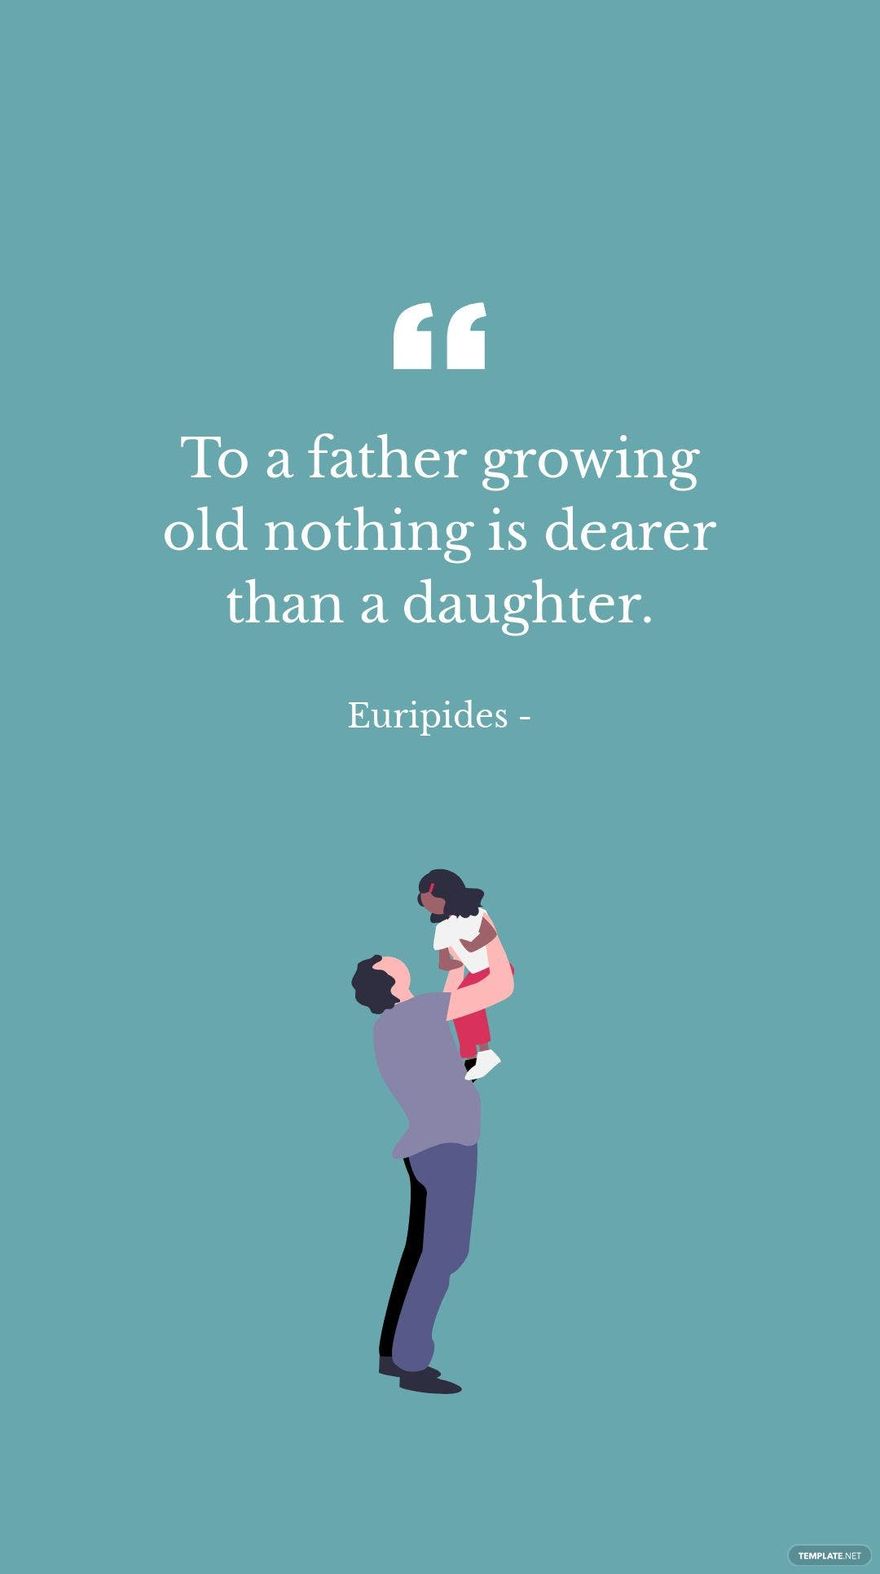 EURIPIDES - To a father growing old nothing is dearer than a daughter. in JPG